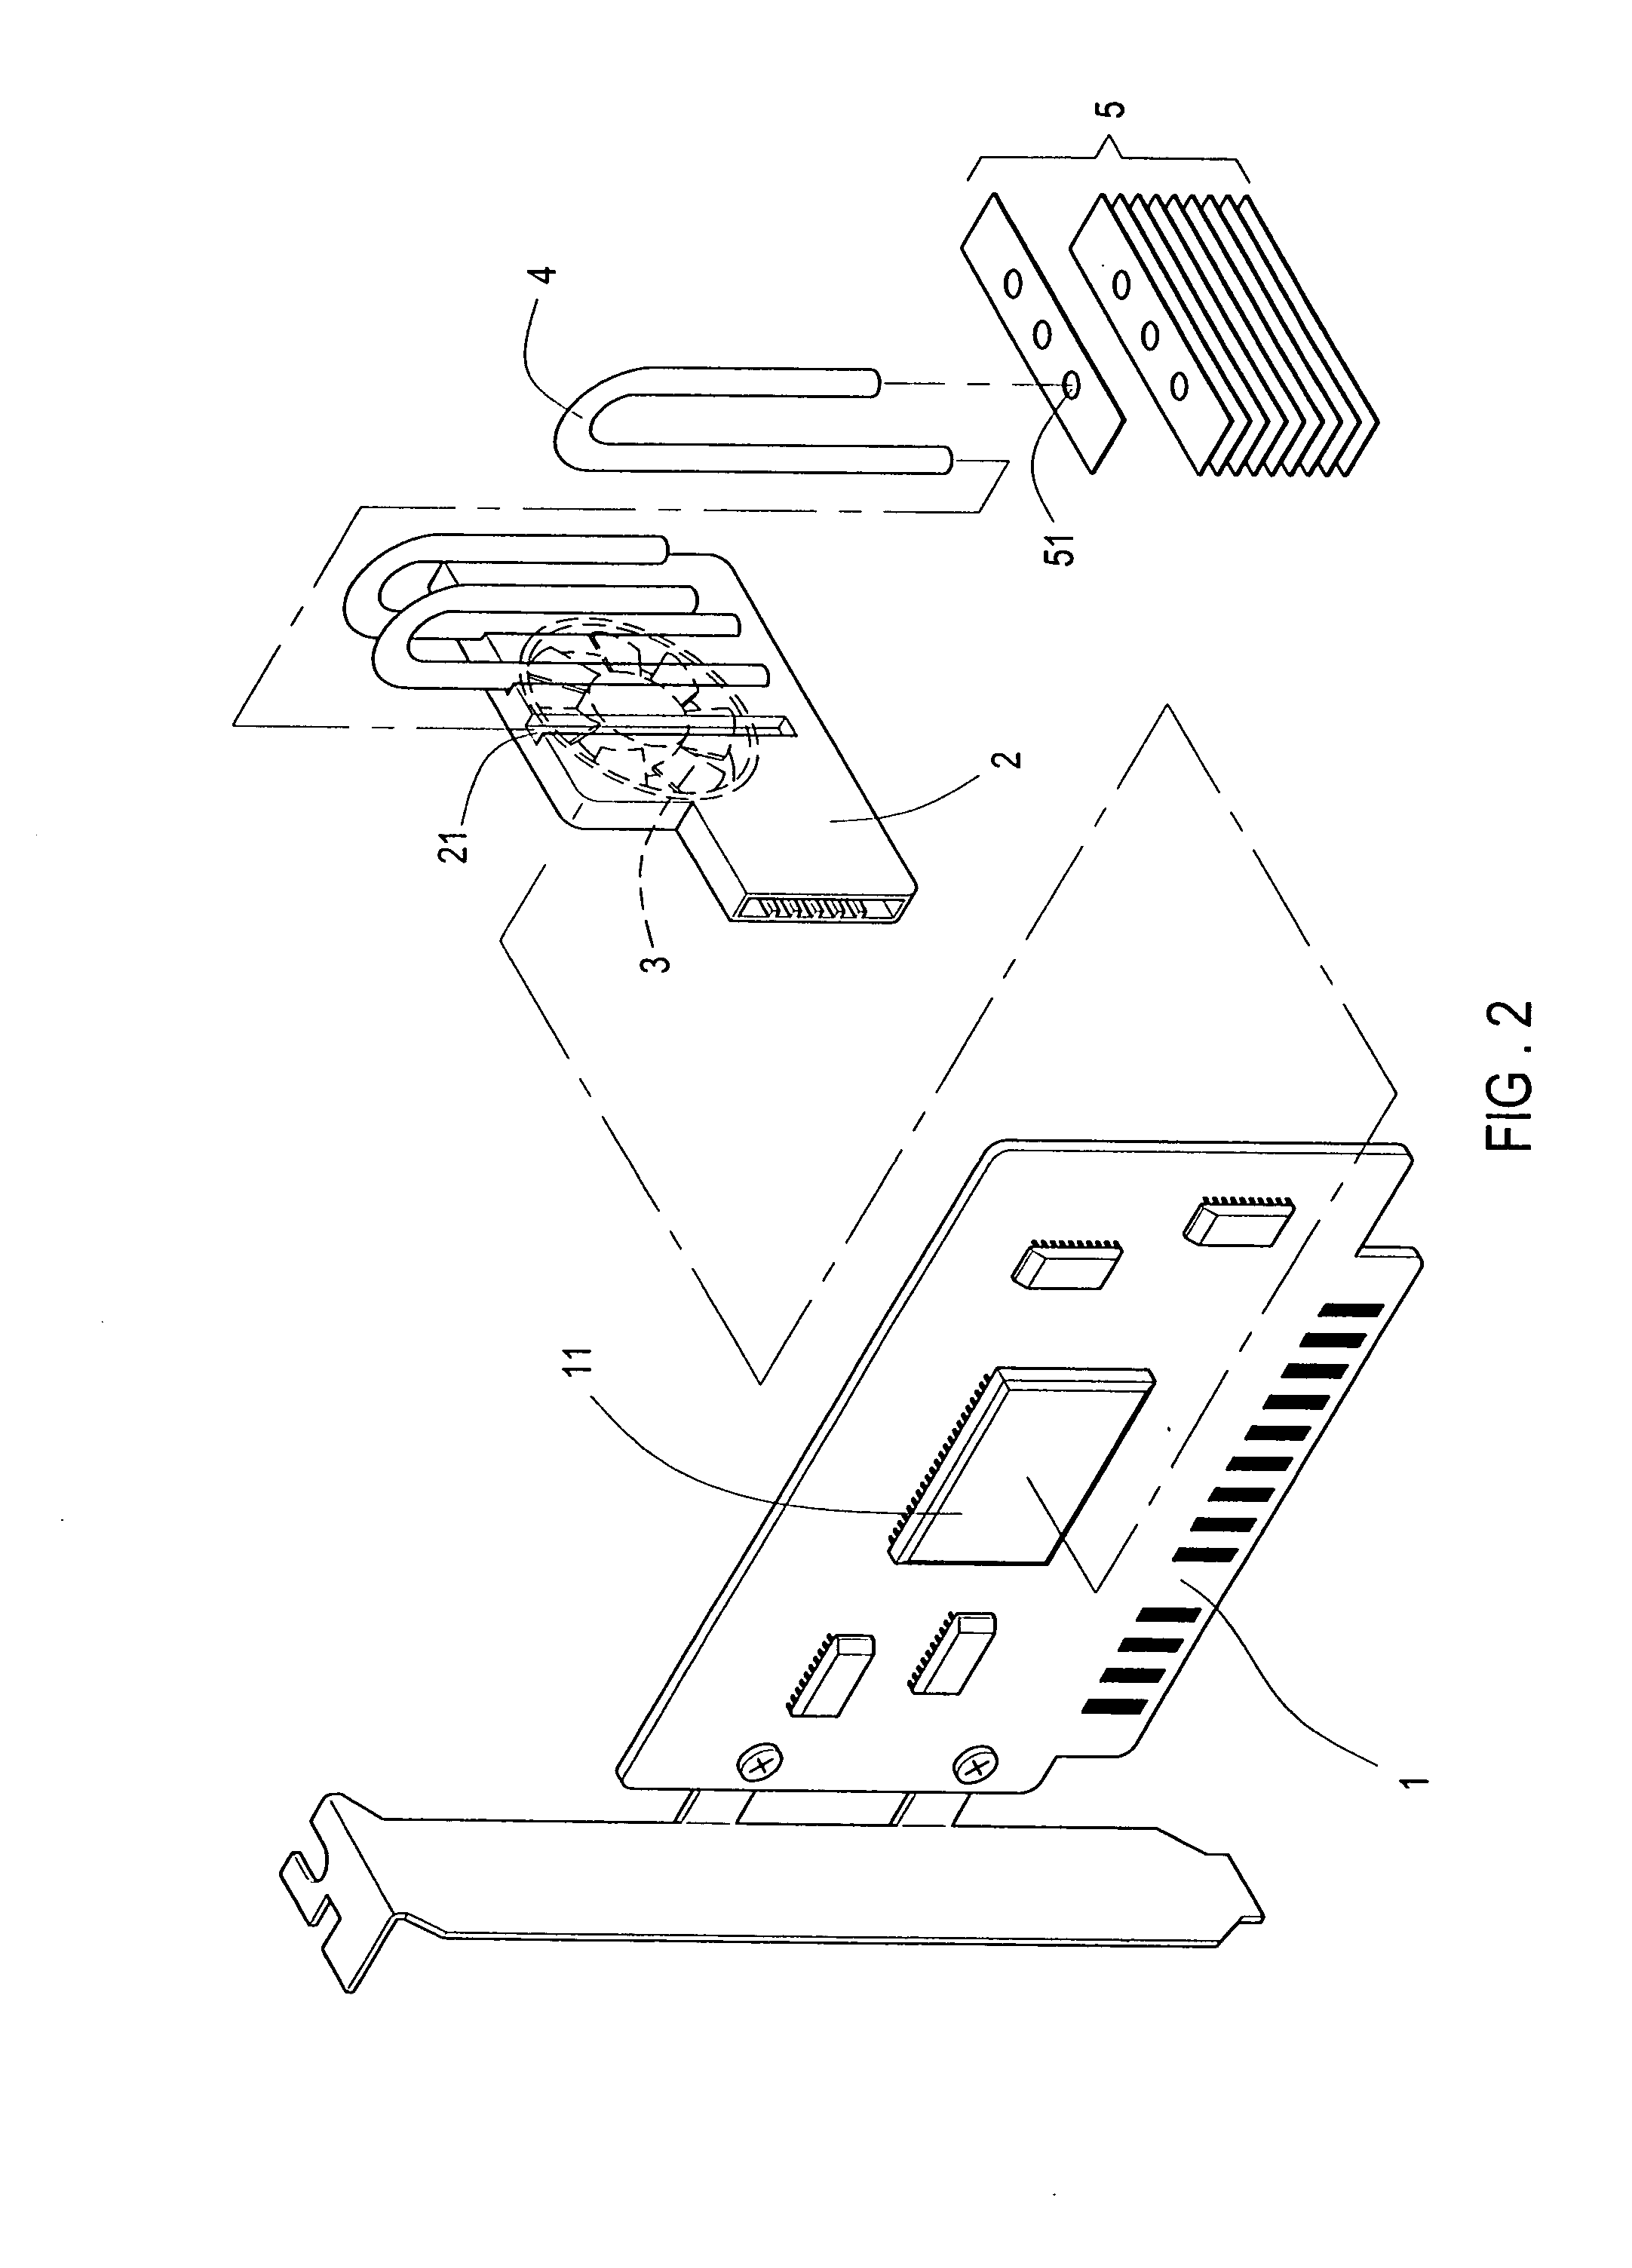 Heat dissipating structure of accelerated graphic port card